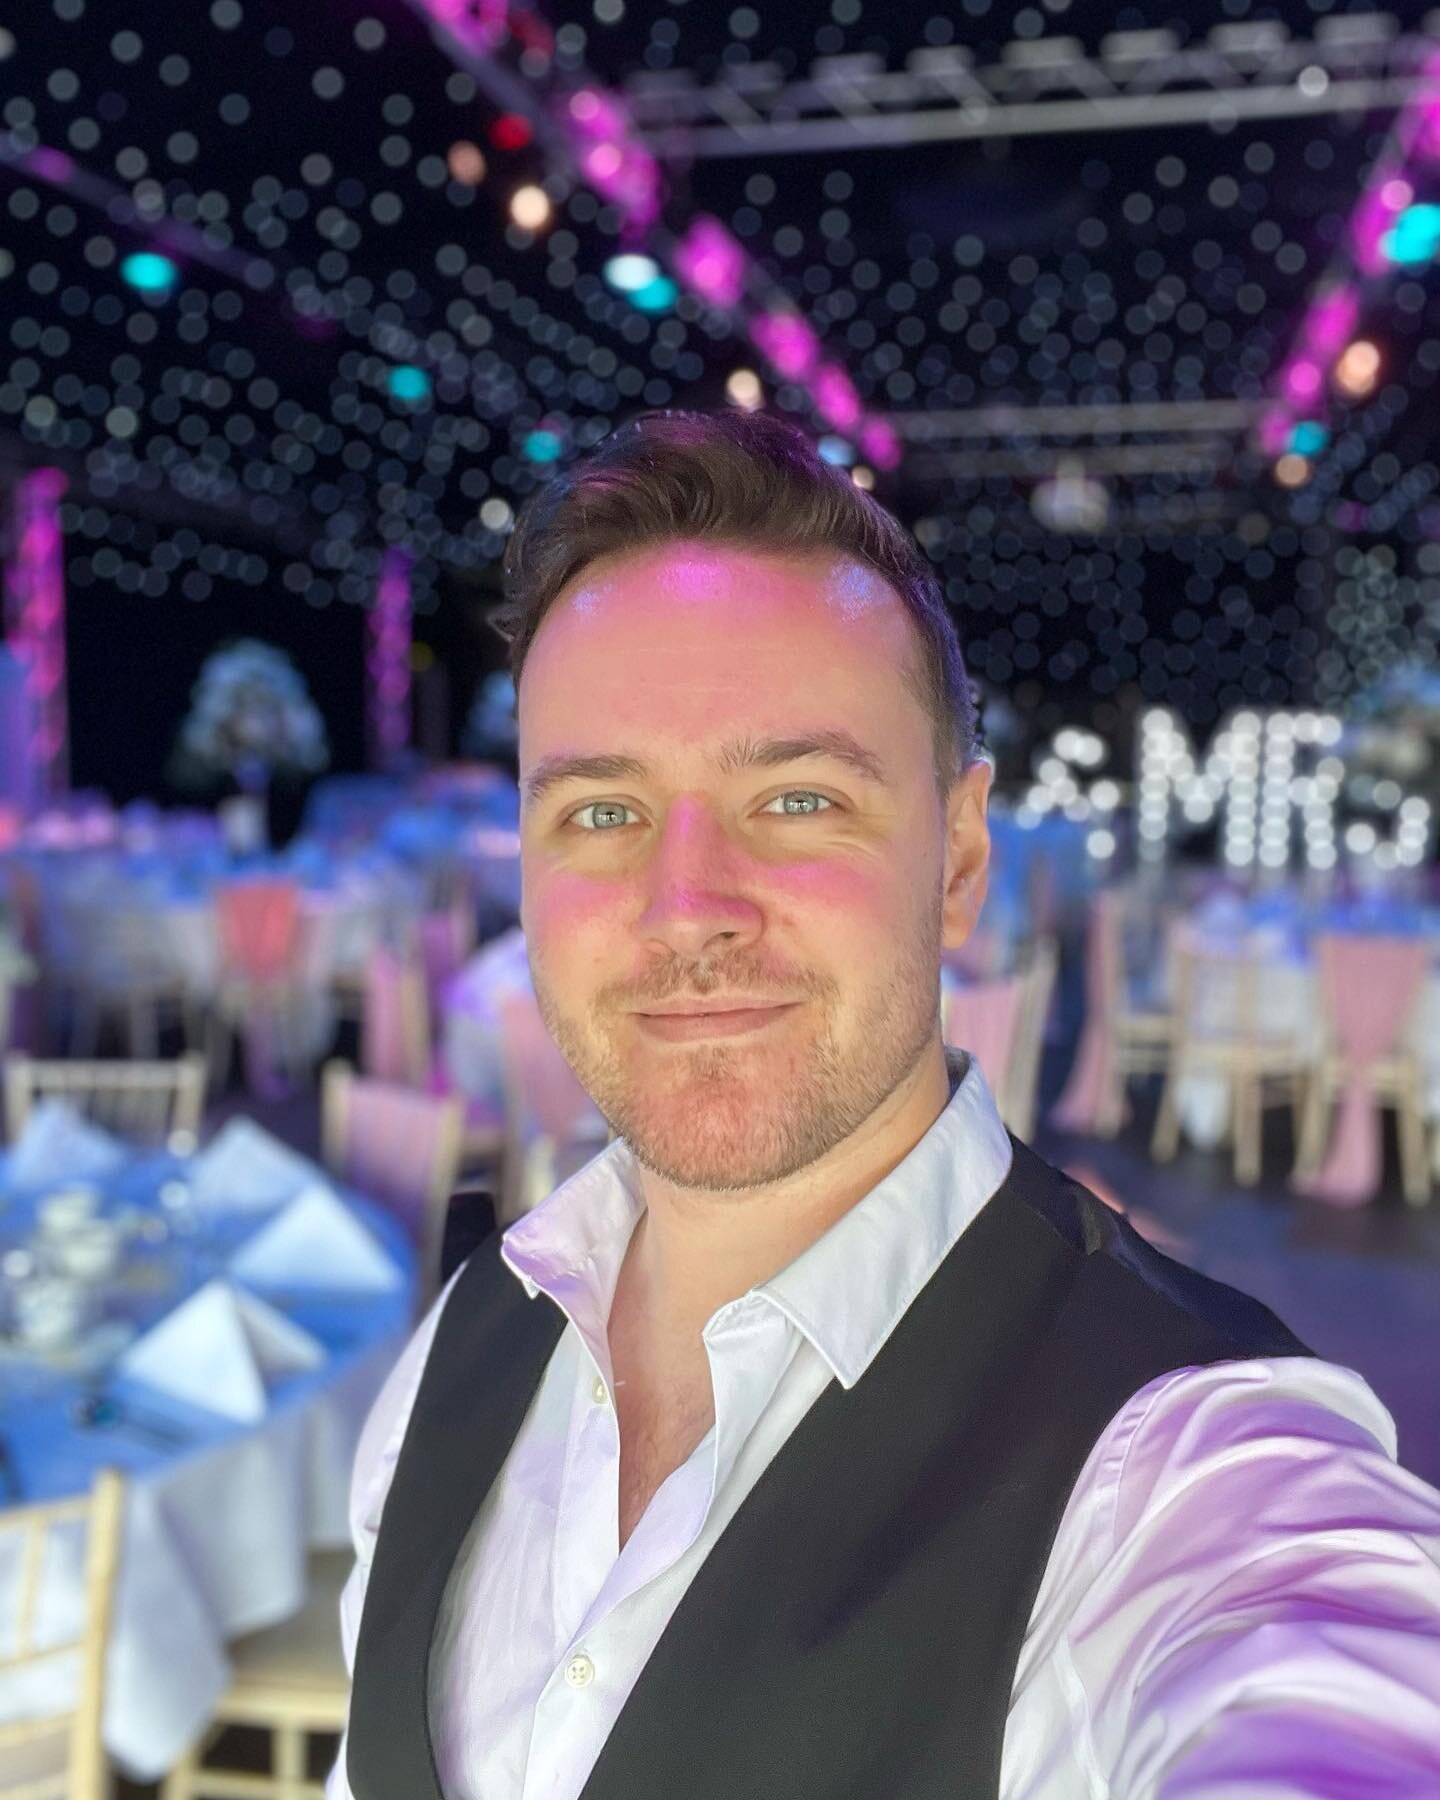 Just the one wedding for me this weekend to round off a mad but fun week of gigging abroad ✈️🇨🇭 and a brand new promo video. Today I&rsquo;m at the breathtaking @venue16ipswich for Mr &amp; Mrs Yule&rsquo;s wedding! ✨✨